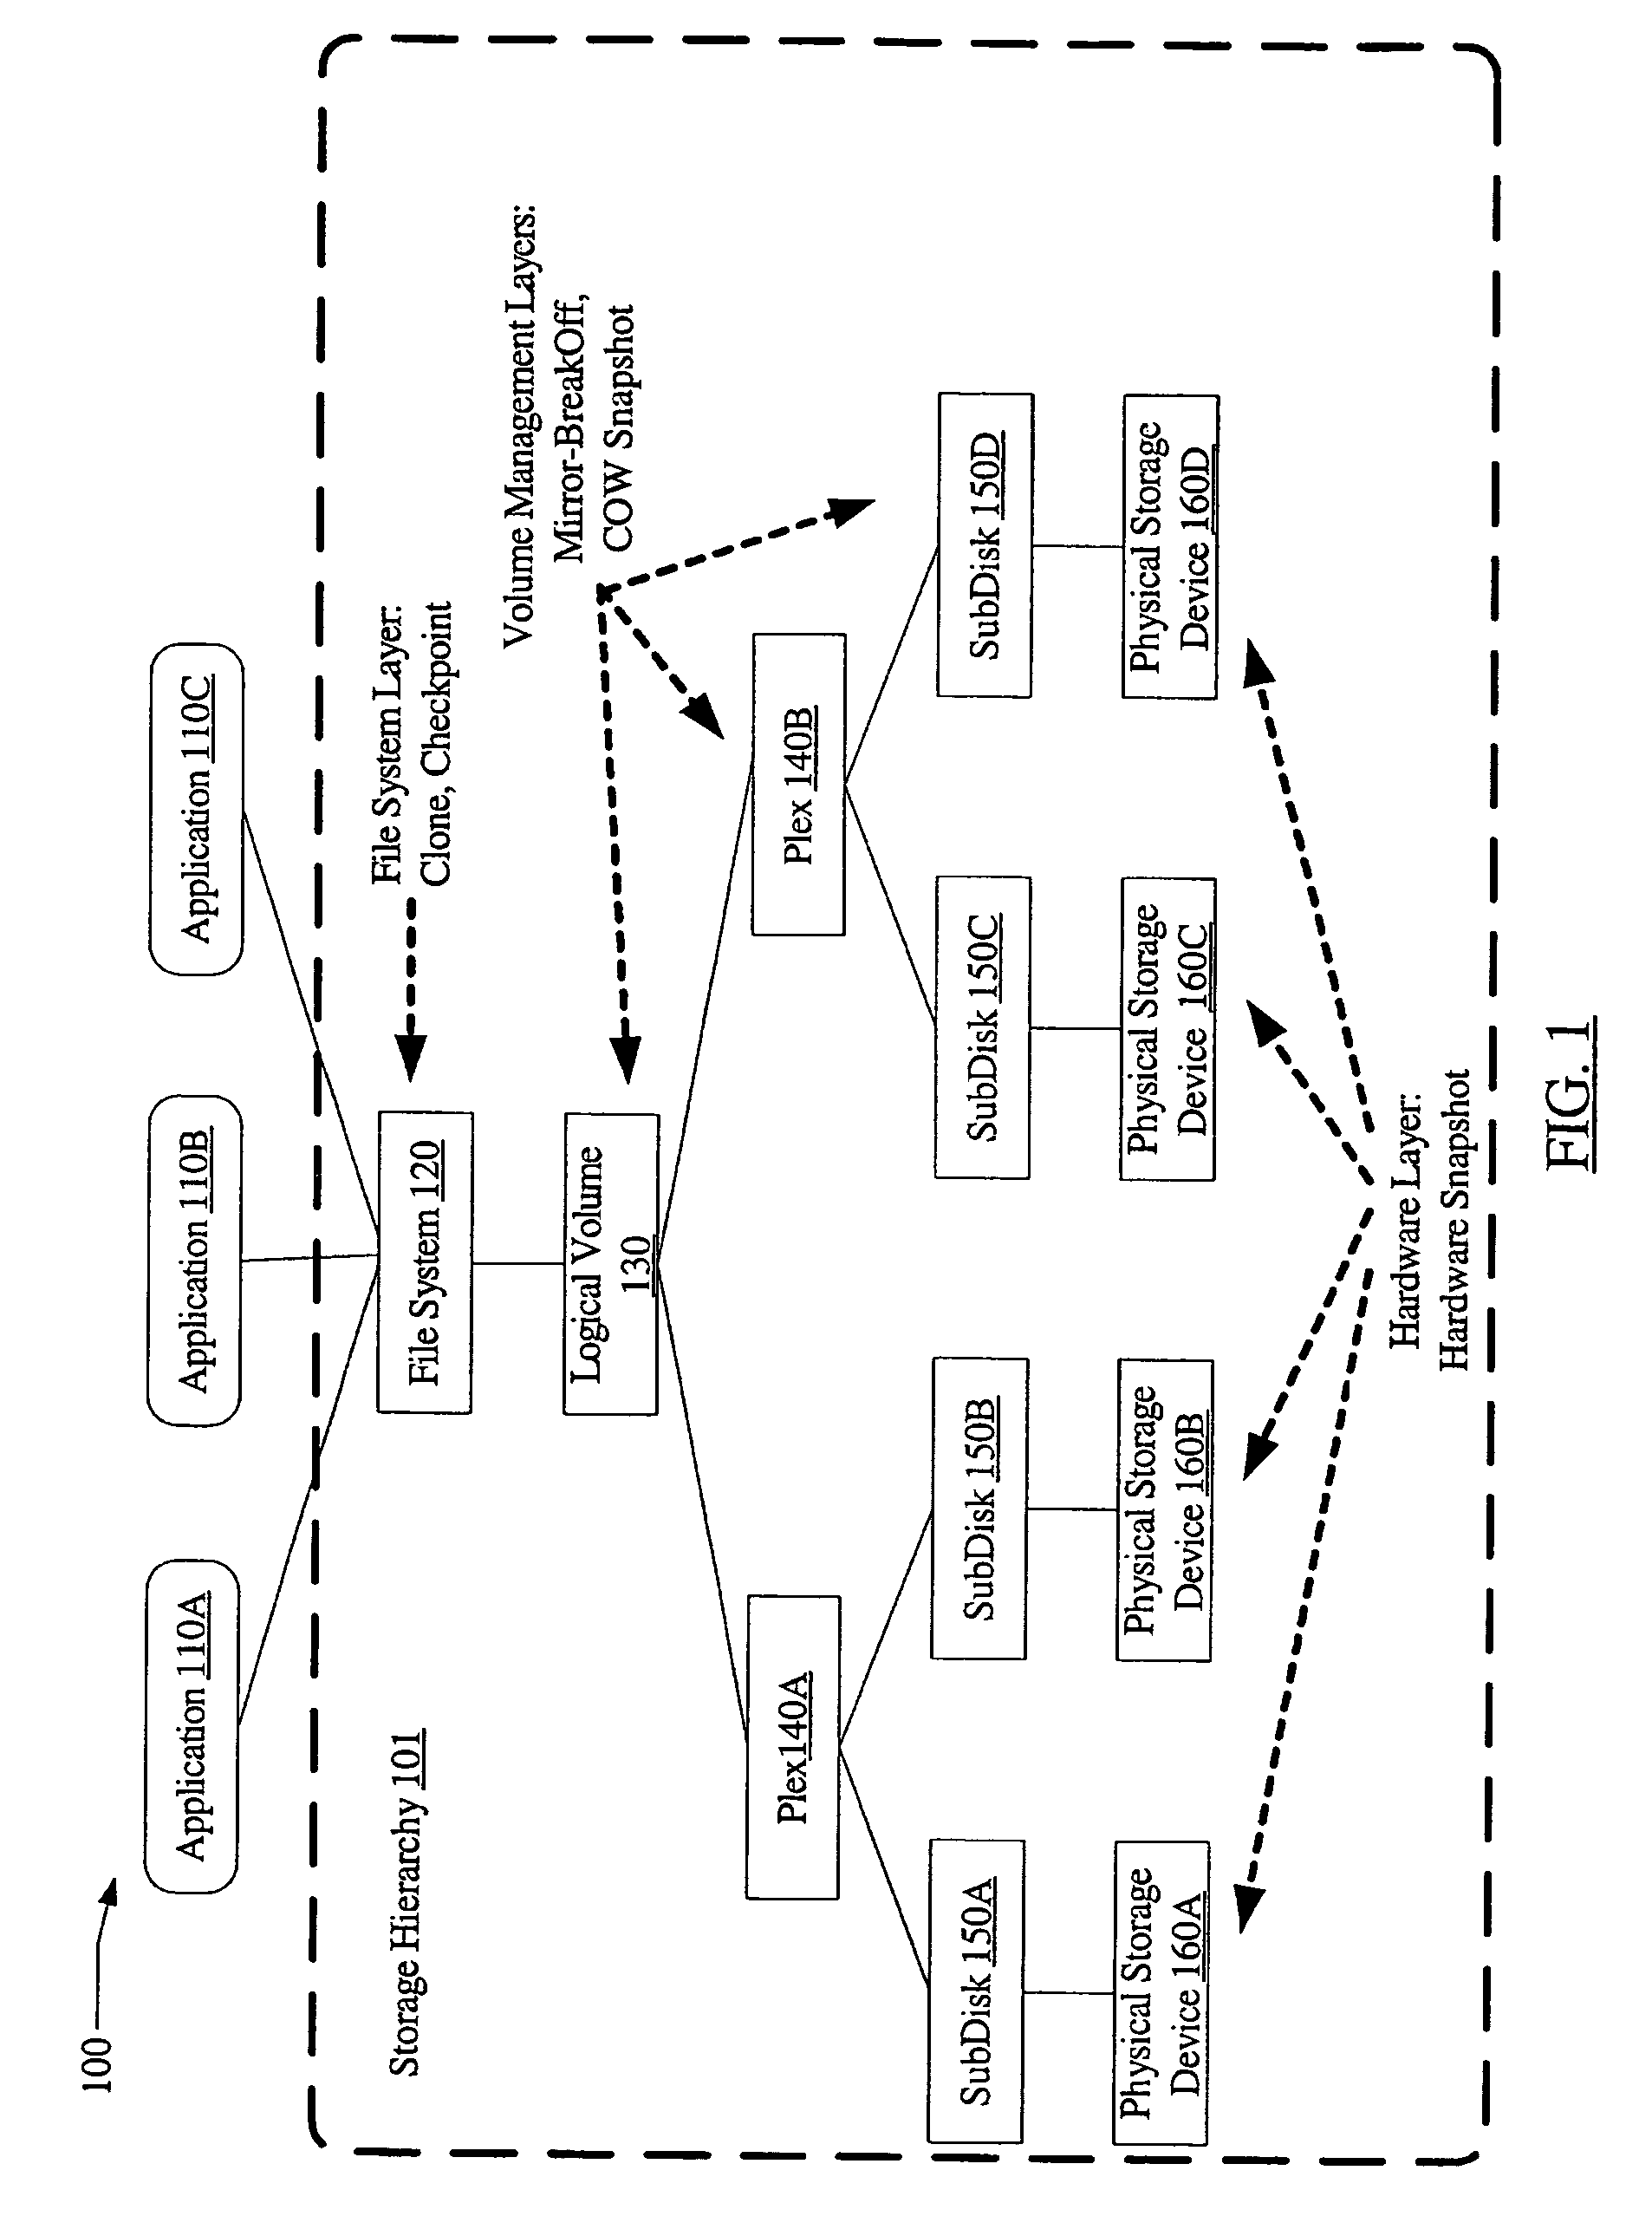 System and method for distributed discovery and management of frozen images in a storage environment